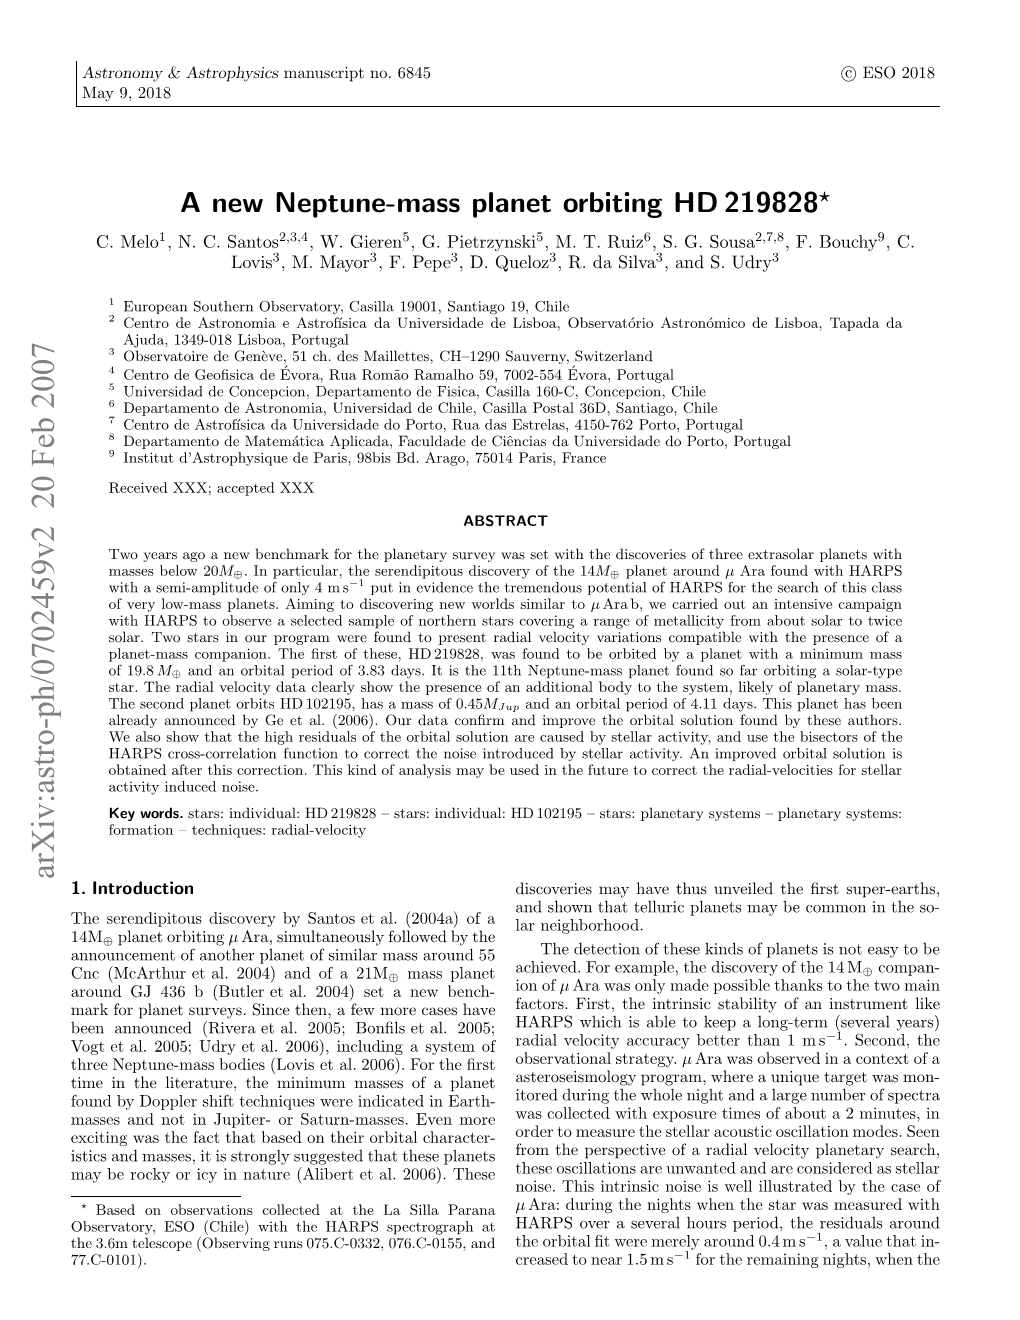 A New Neptune-Mass Planet Orbiting HD 219828 Radial-Velocity of the Star Was an Average of Only About 15 Table 1